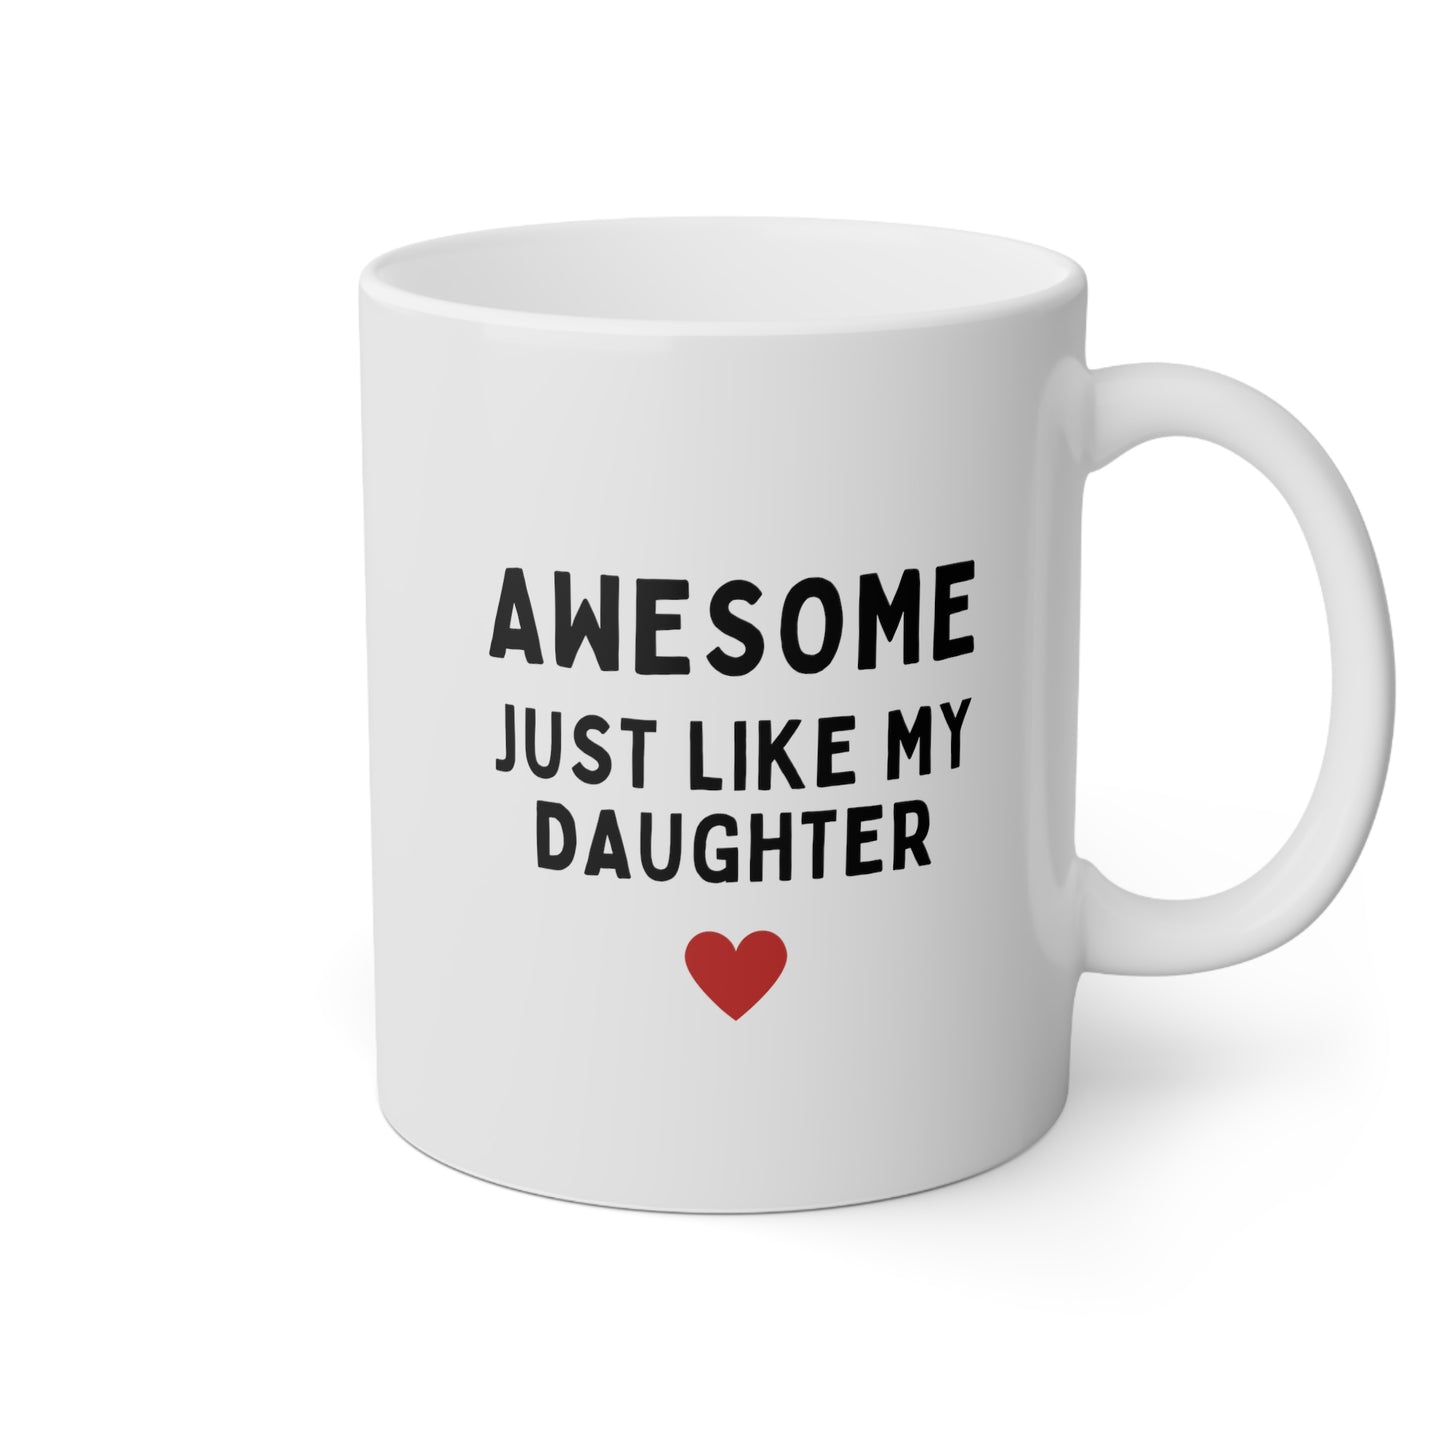 Awesome Just Like My Daughter 11oz white funny large coffee mug gift for husband daughter to dad fathers day cup waveywares wavey wares wavywares wavy wares